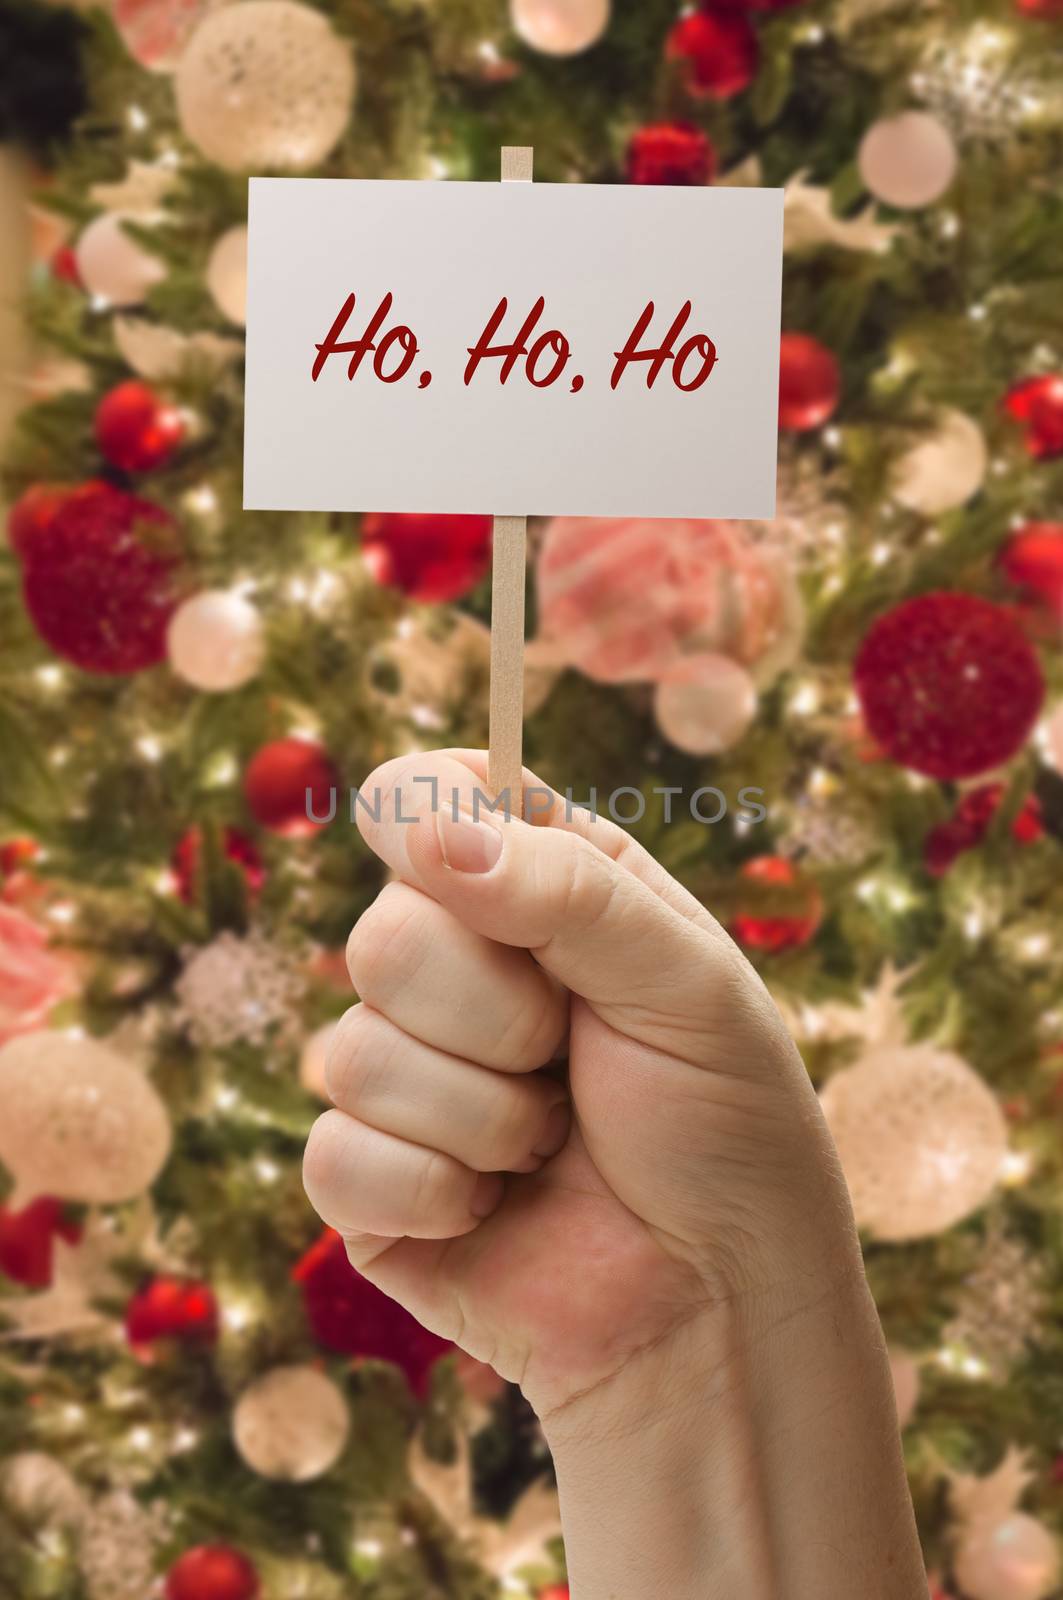 Hand Holding Ho Ho Ho Card In Front of Decorated Christmas Tree. by Feverpitched